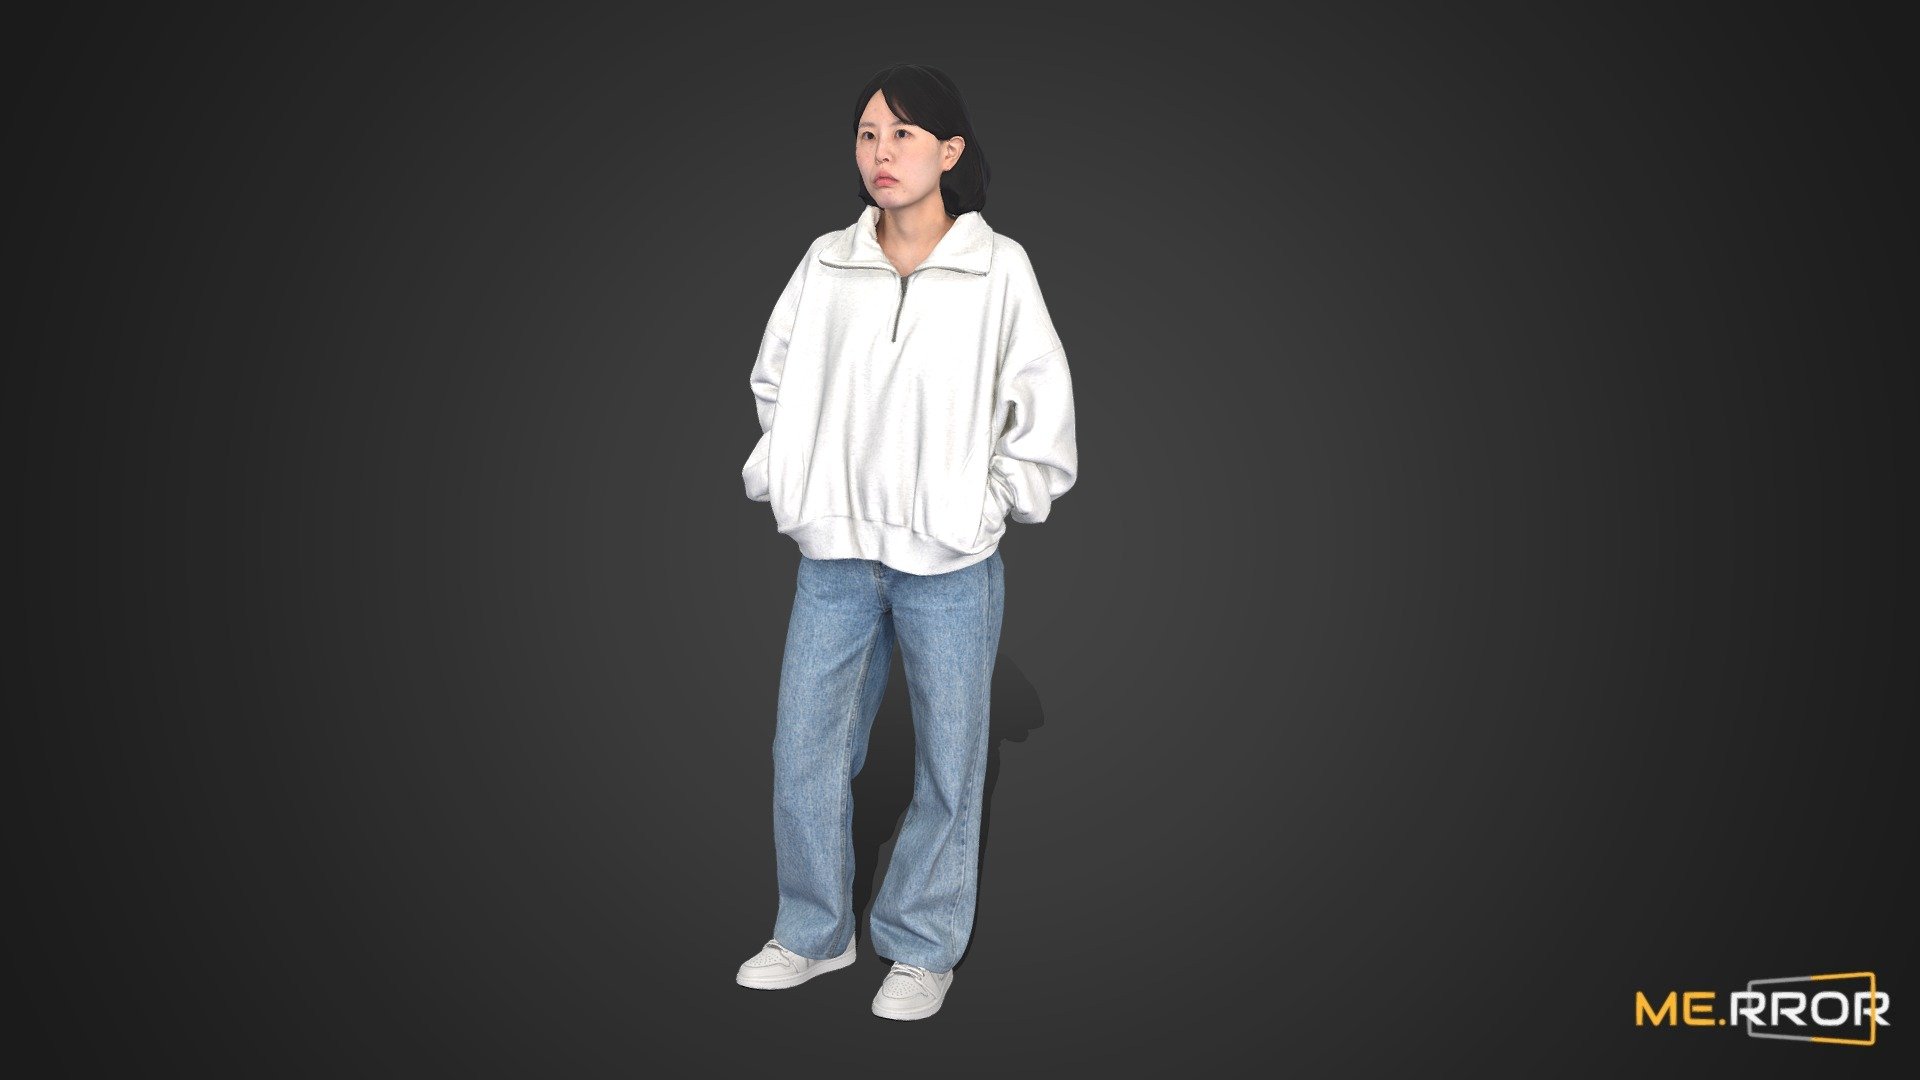 ME.RROR


From 3D models of Asian individuals to a fresh selection of free assets available each month - explore a richer diversity of photorealistic 3D assets at the ME.RROR asset store!

https://me-rror.com/store




[Model Info]




Model Formats : FBX, MAX


Texture Maps (8K) : Diffuse, Normal




Find Scanned - 2M poly version here: https://sketchfab.com/3d-models/ae49eecb5e234e098935b60767bc9c80



If you encounter any problems using this model, please feel free to contact us. We'd be glad to help you.



[About ME.RROR]

Step into the future with ME.RROR, South Korea's leading 3D specialist. Bespoke creations are not just possible; they are our specialty.

Service areas:




3D scanning

3D modeling

Virtual human creation

Inquiries: https://merror.channel.io/lounge - [Game-Ready] Asian Woman Scan_Posed 11 - Buy Royalty Free 3D model by ME.RROR Studio (@merror) 3d model